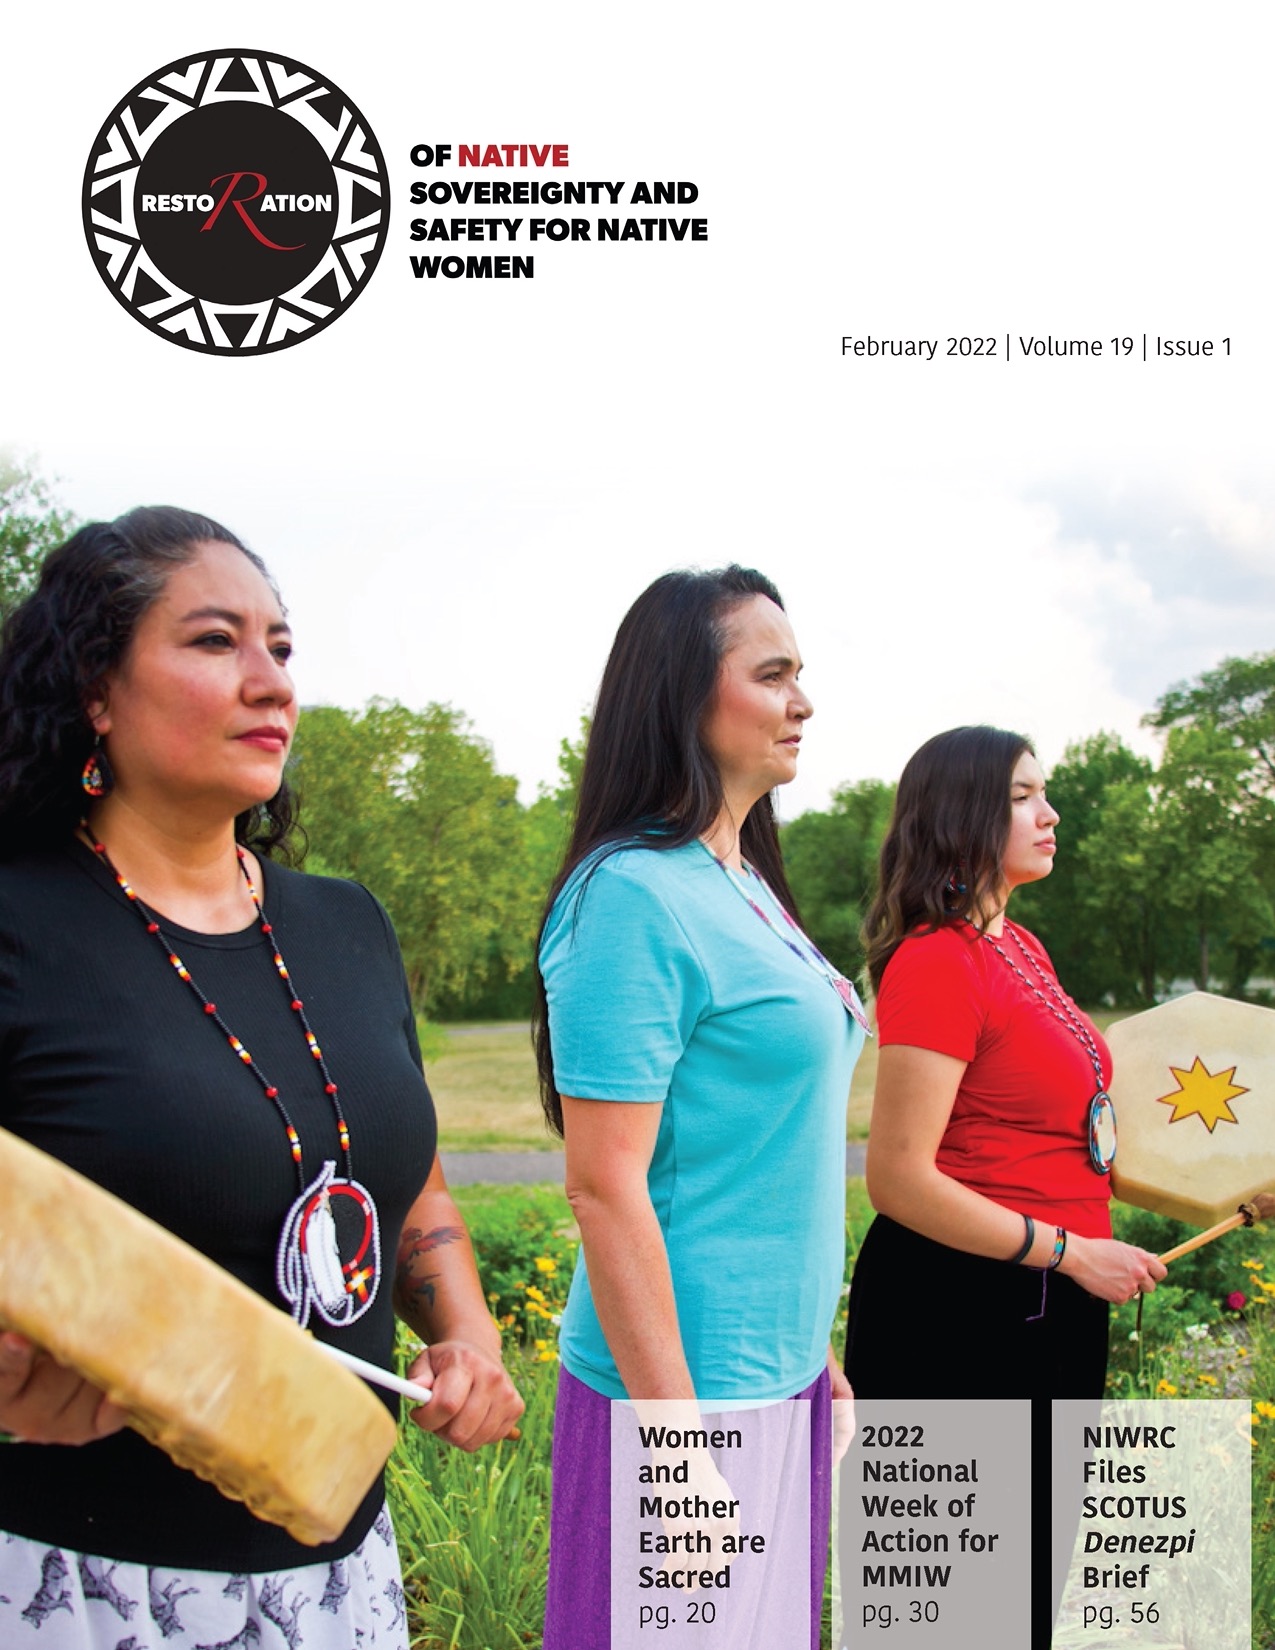 Restoration Vol. 19, Issue 1 Cover: Three Native women singing, two of the women are holder drums.